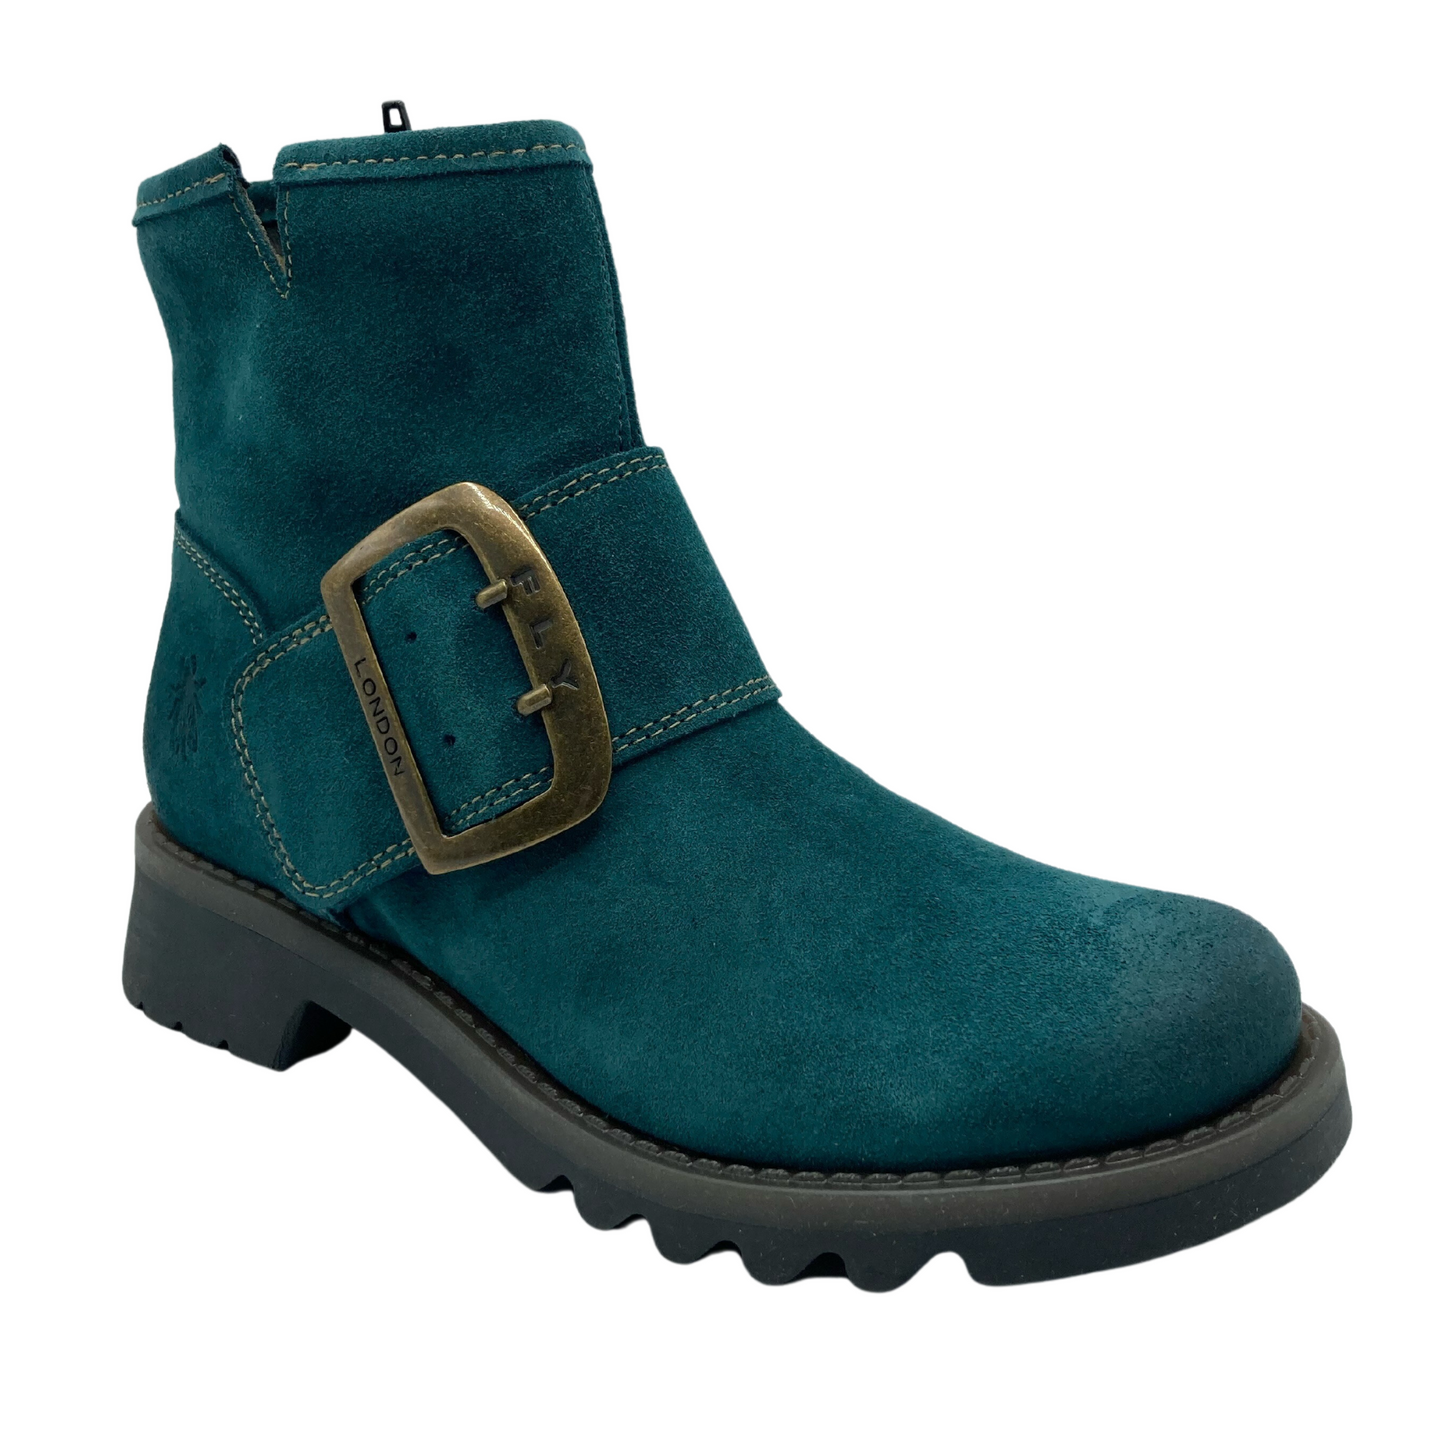 45 degree angled view of a dark cyan suede short boot with large brass buckle detail on the upper strap